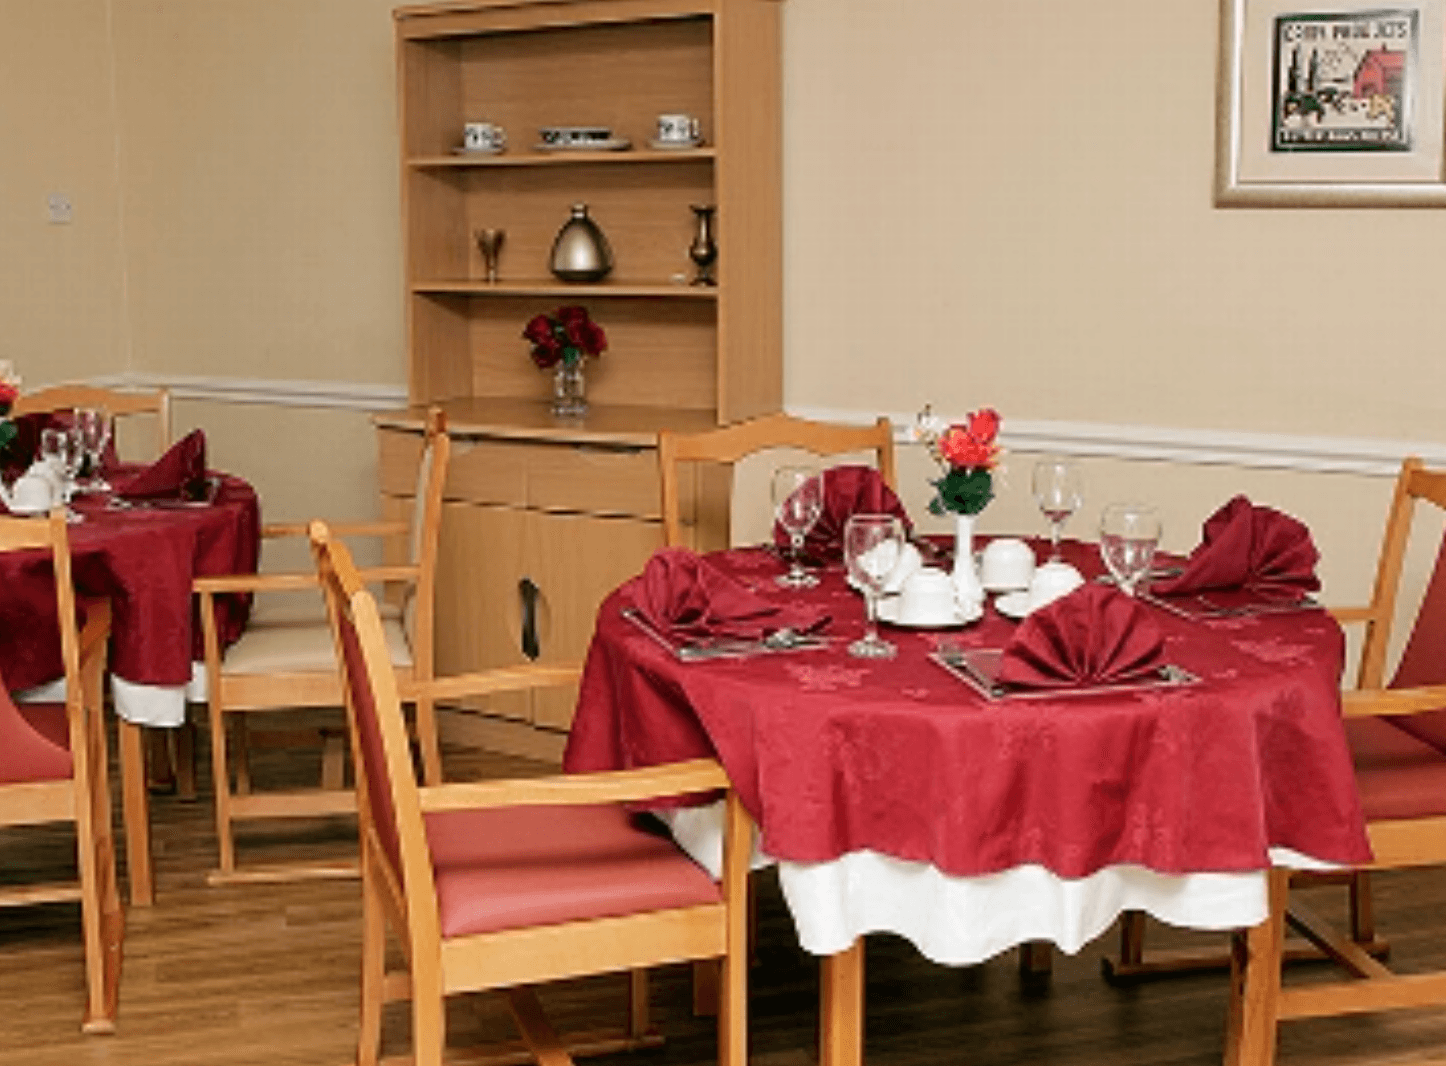 Dining area of Craigbank Care Home in Glasgow, Scotland